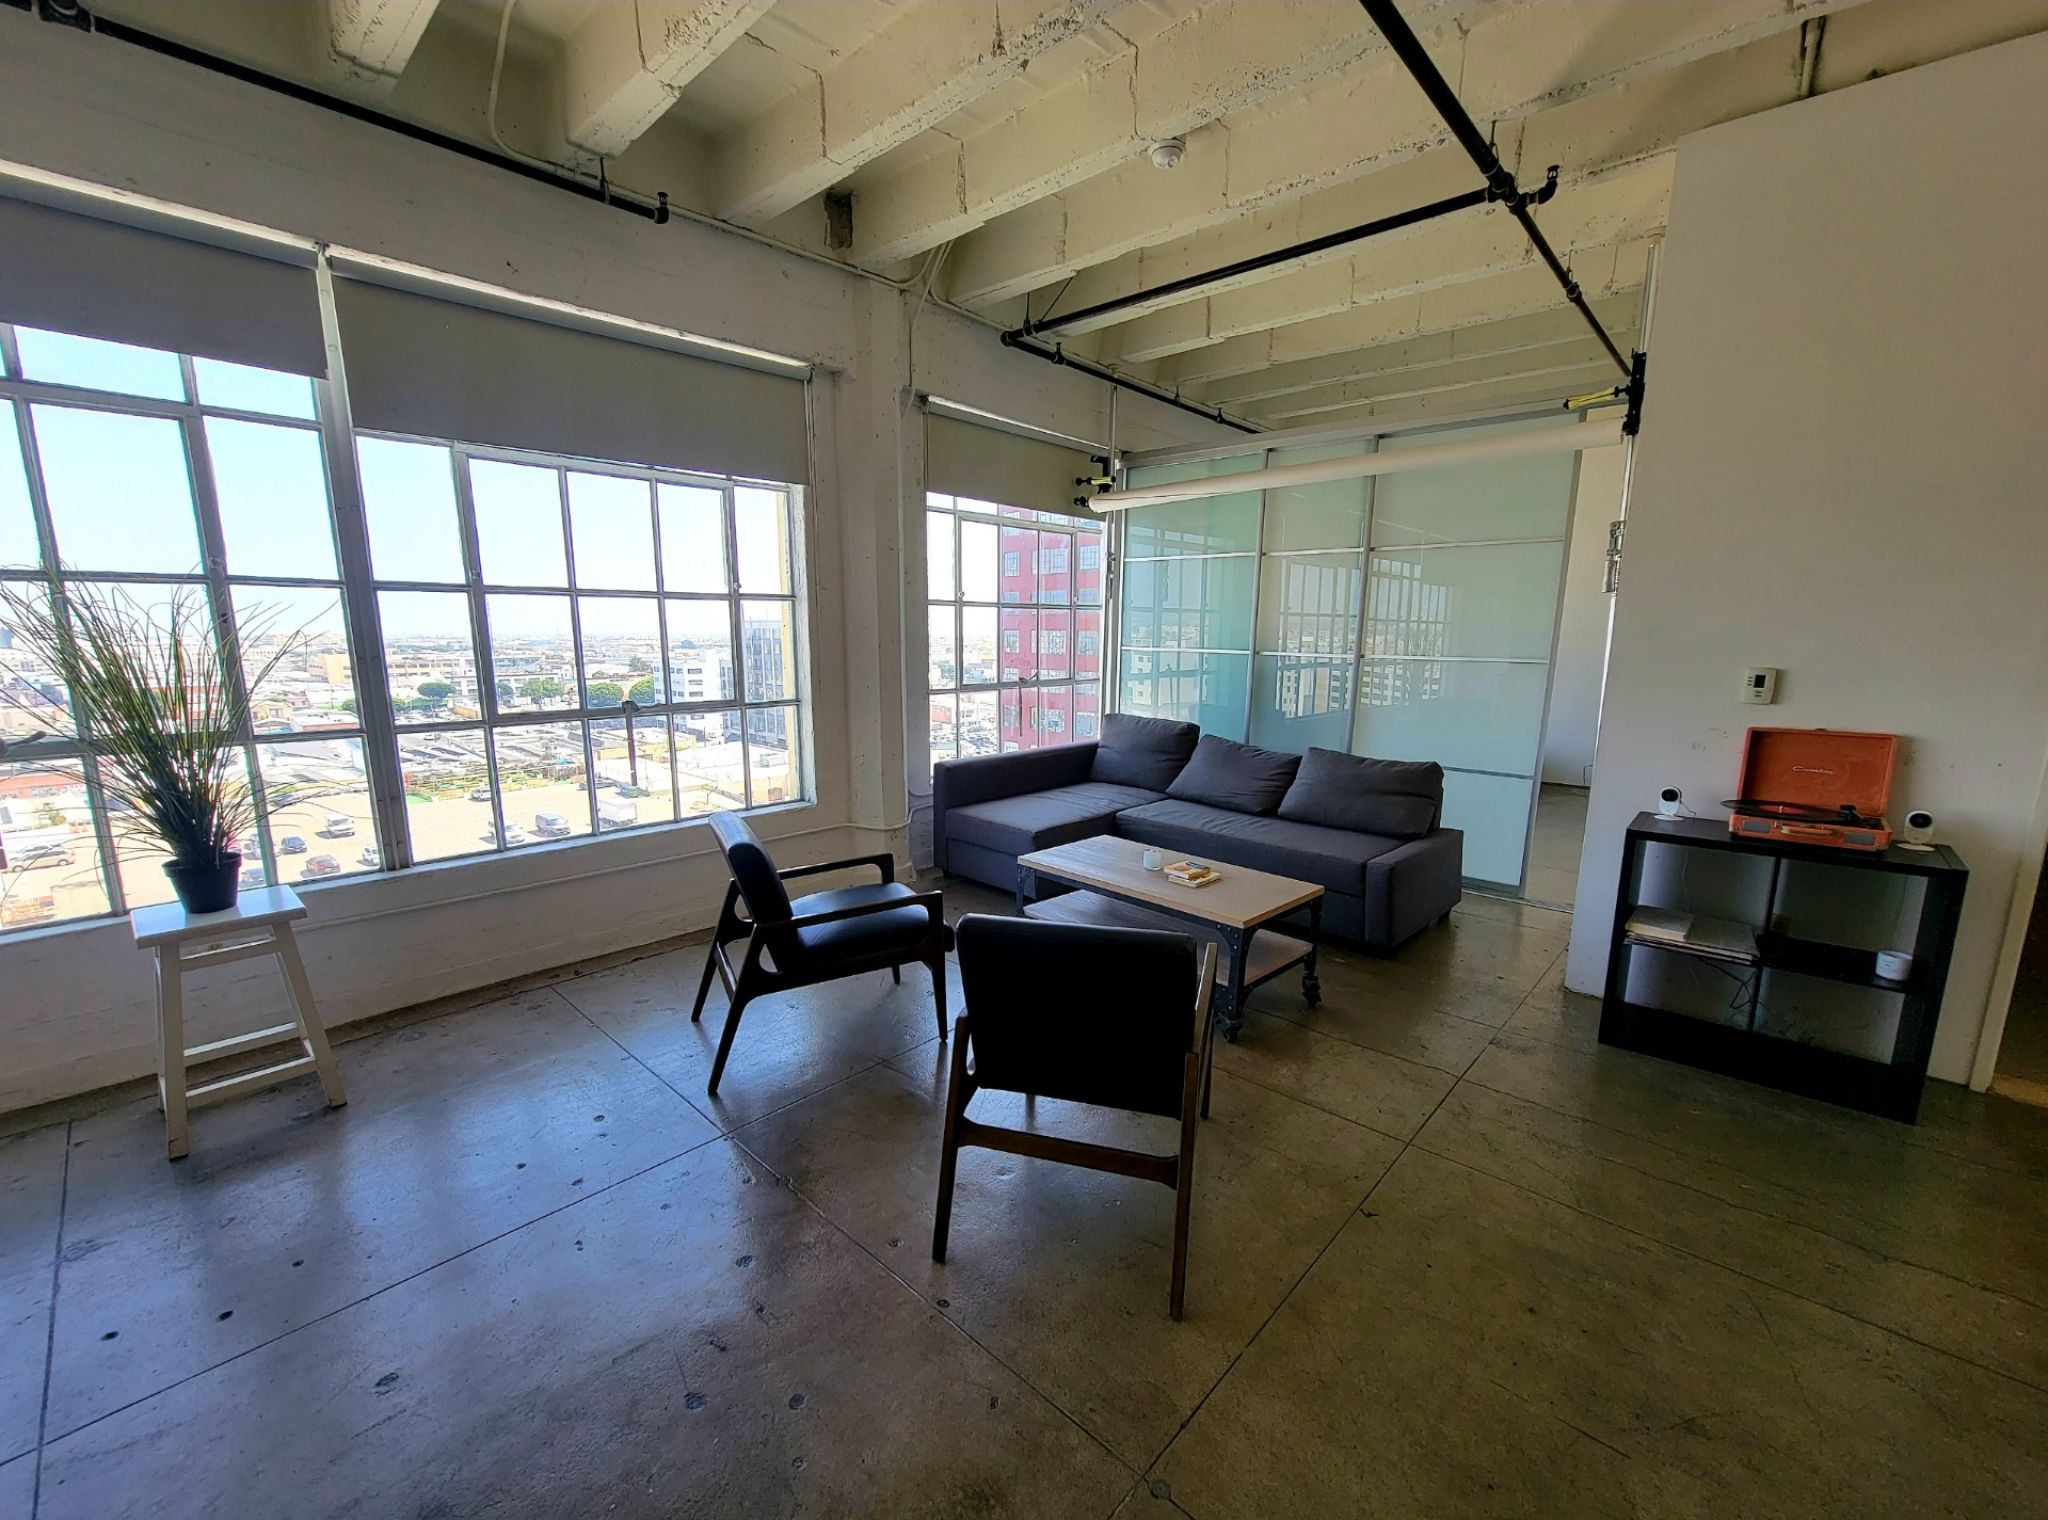 Room overlooking city with two slate gray chairs and a wraparound couch. There is a white table with a plant on it. There is also another table with an old orange vinyl record player.